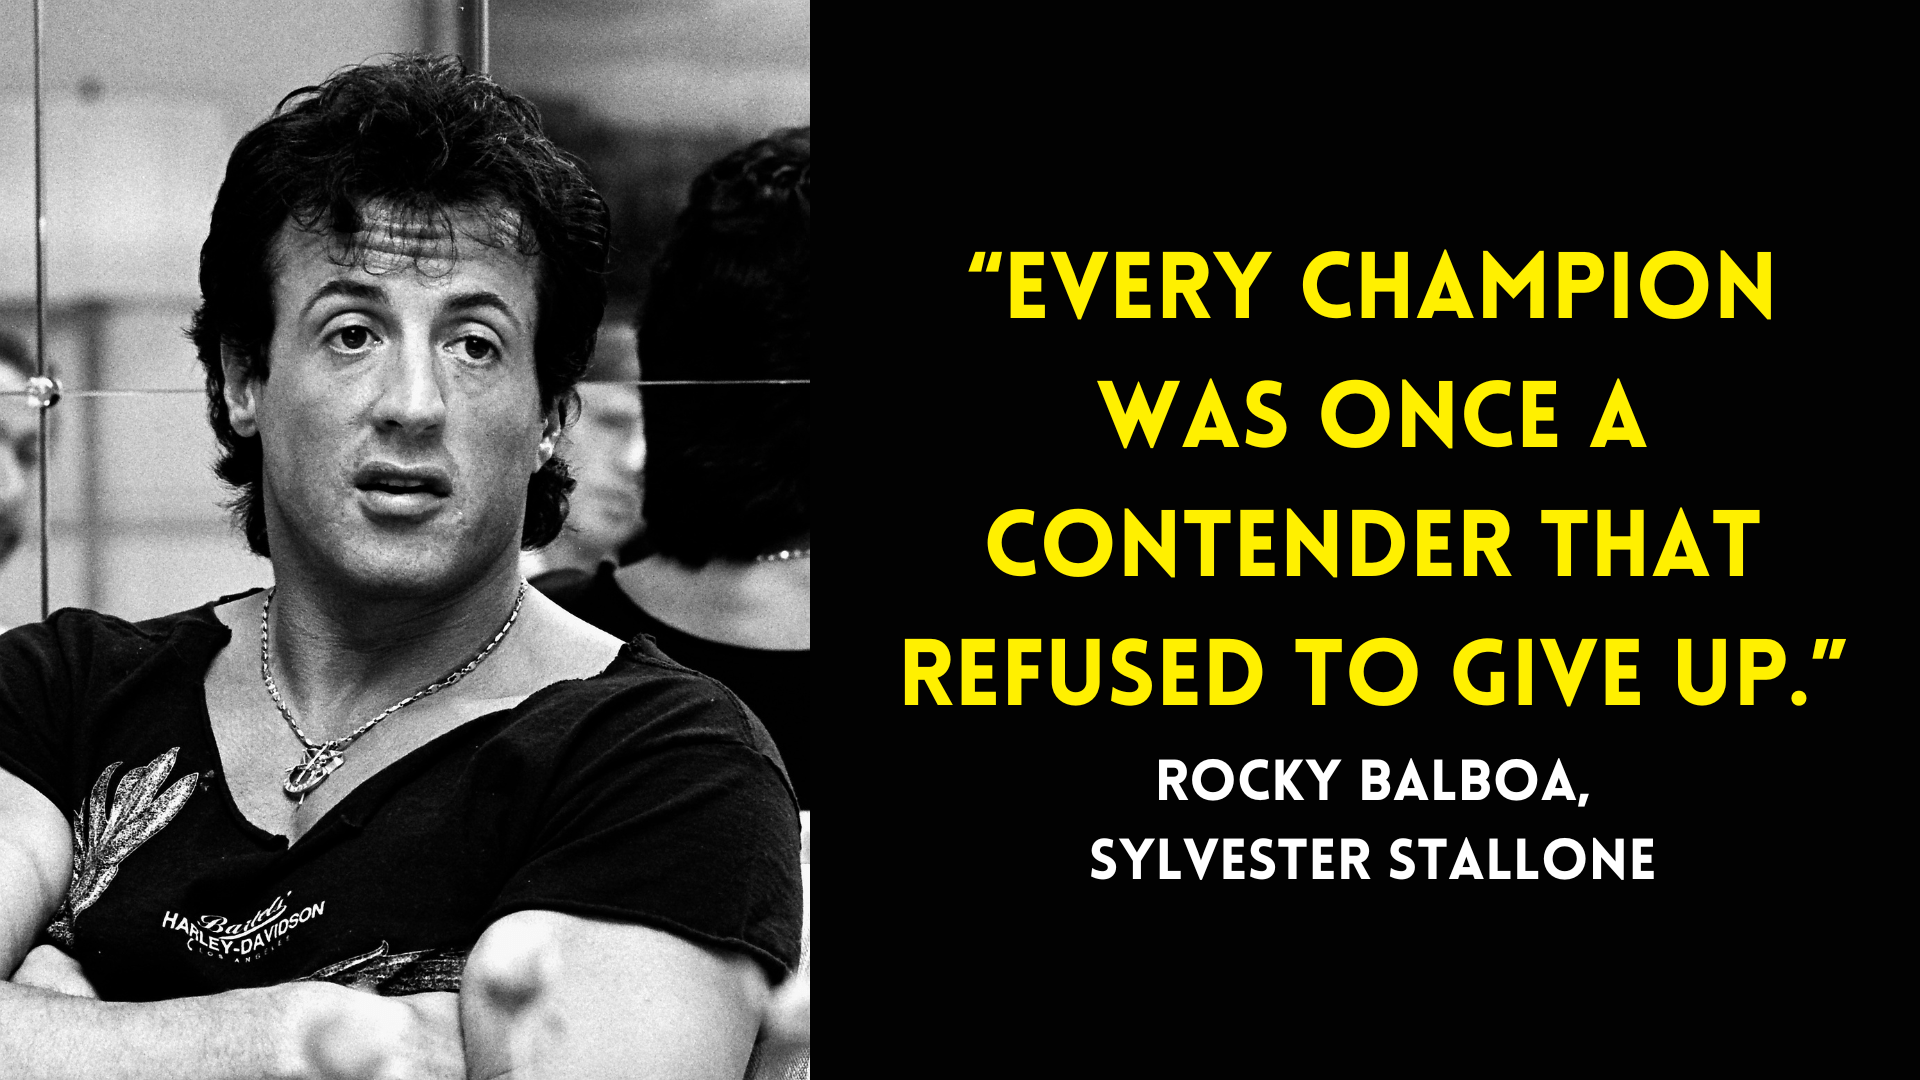 sylvester stallone quotes